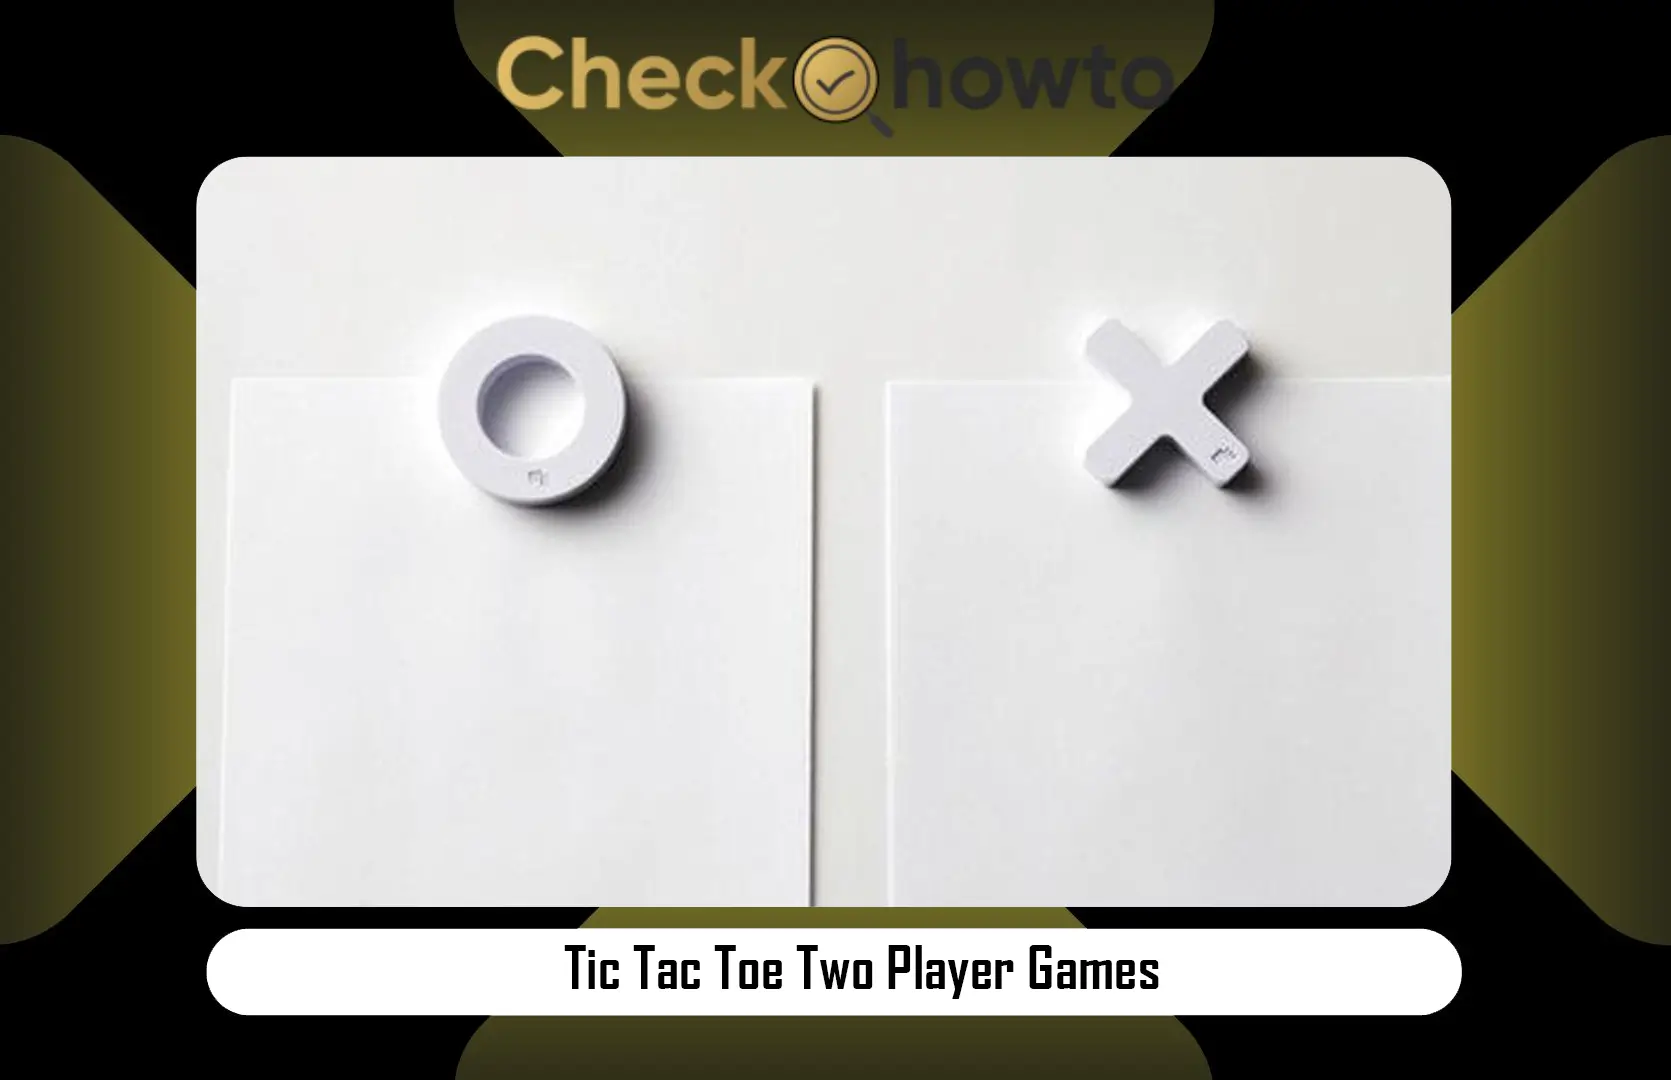 Tic Tac Toe Two Player Games